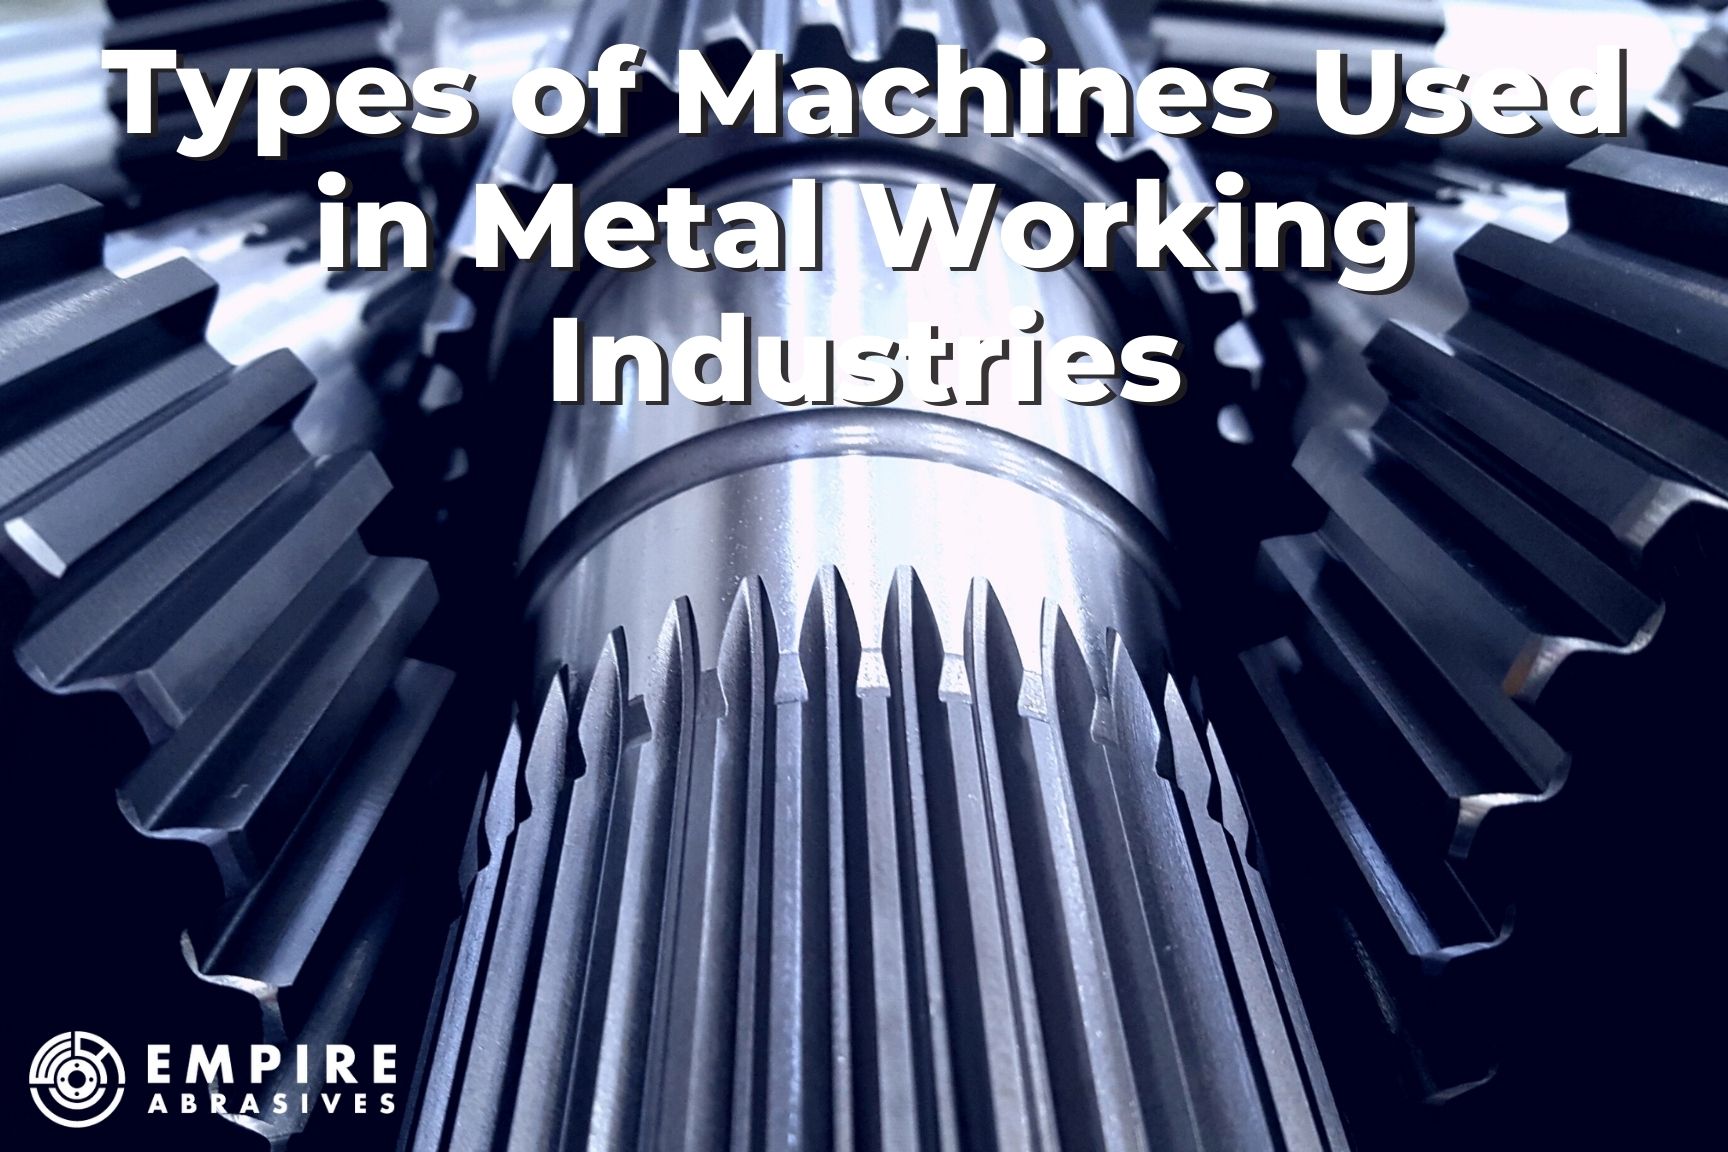 Blog header - types of machines used in metal working industries by Empire Abrasives